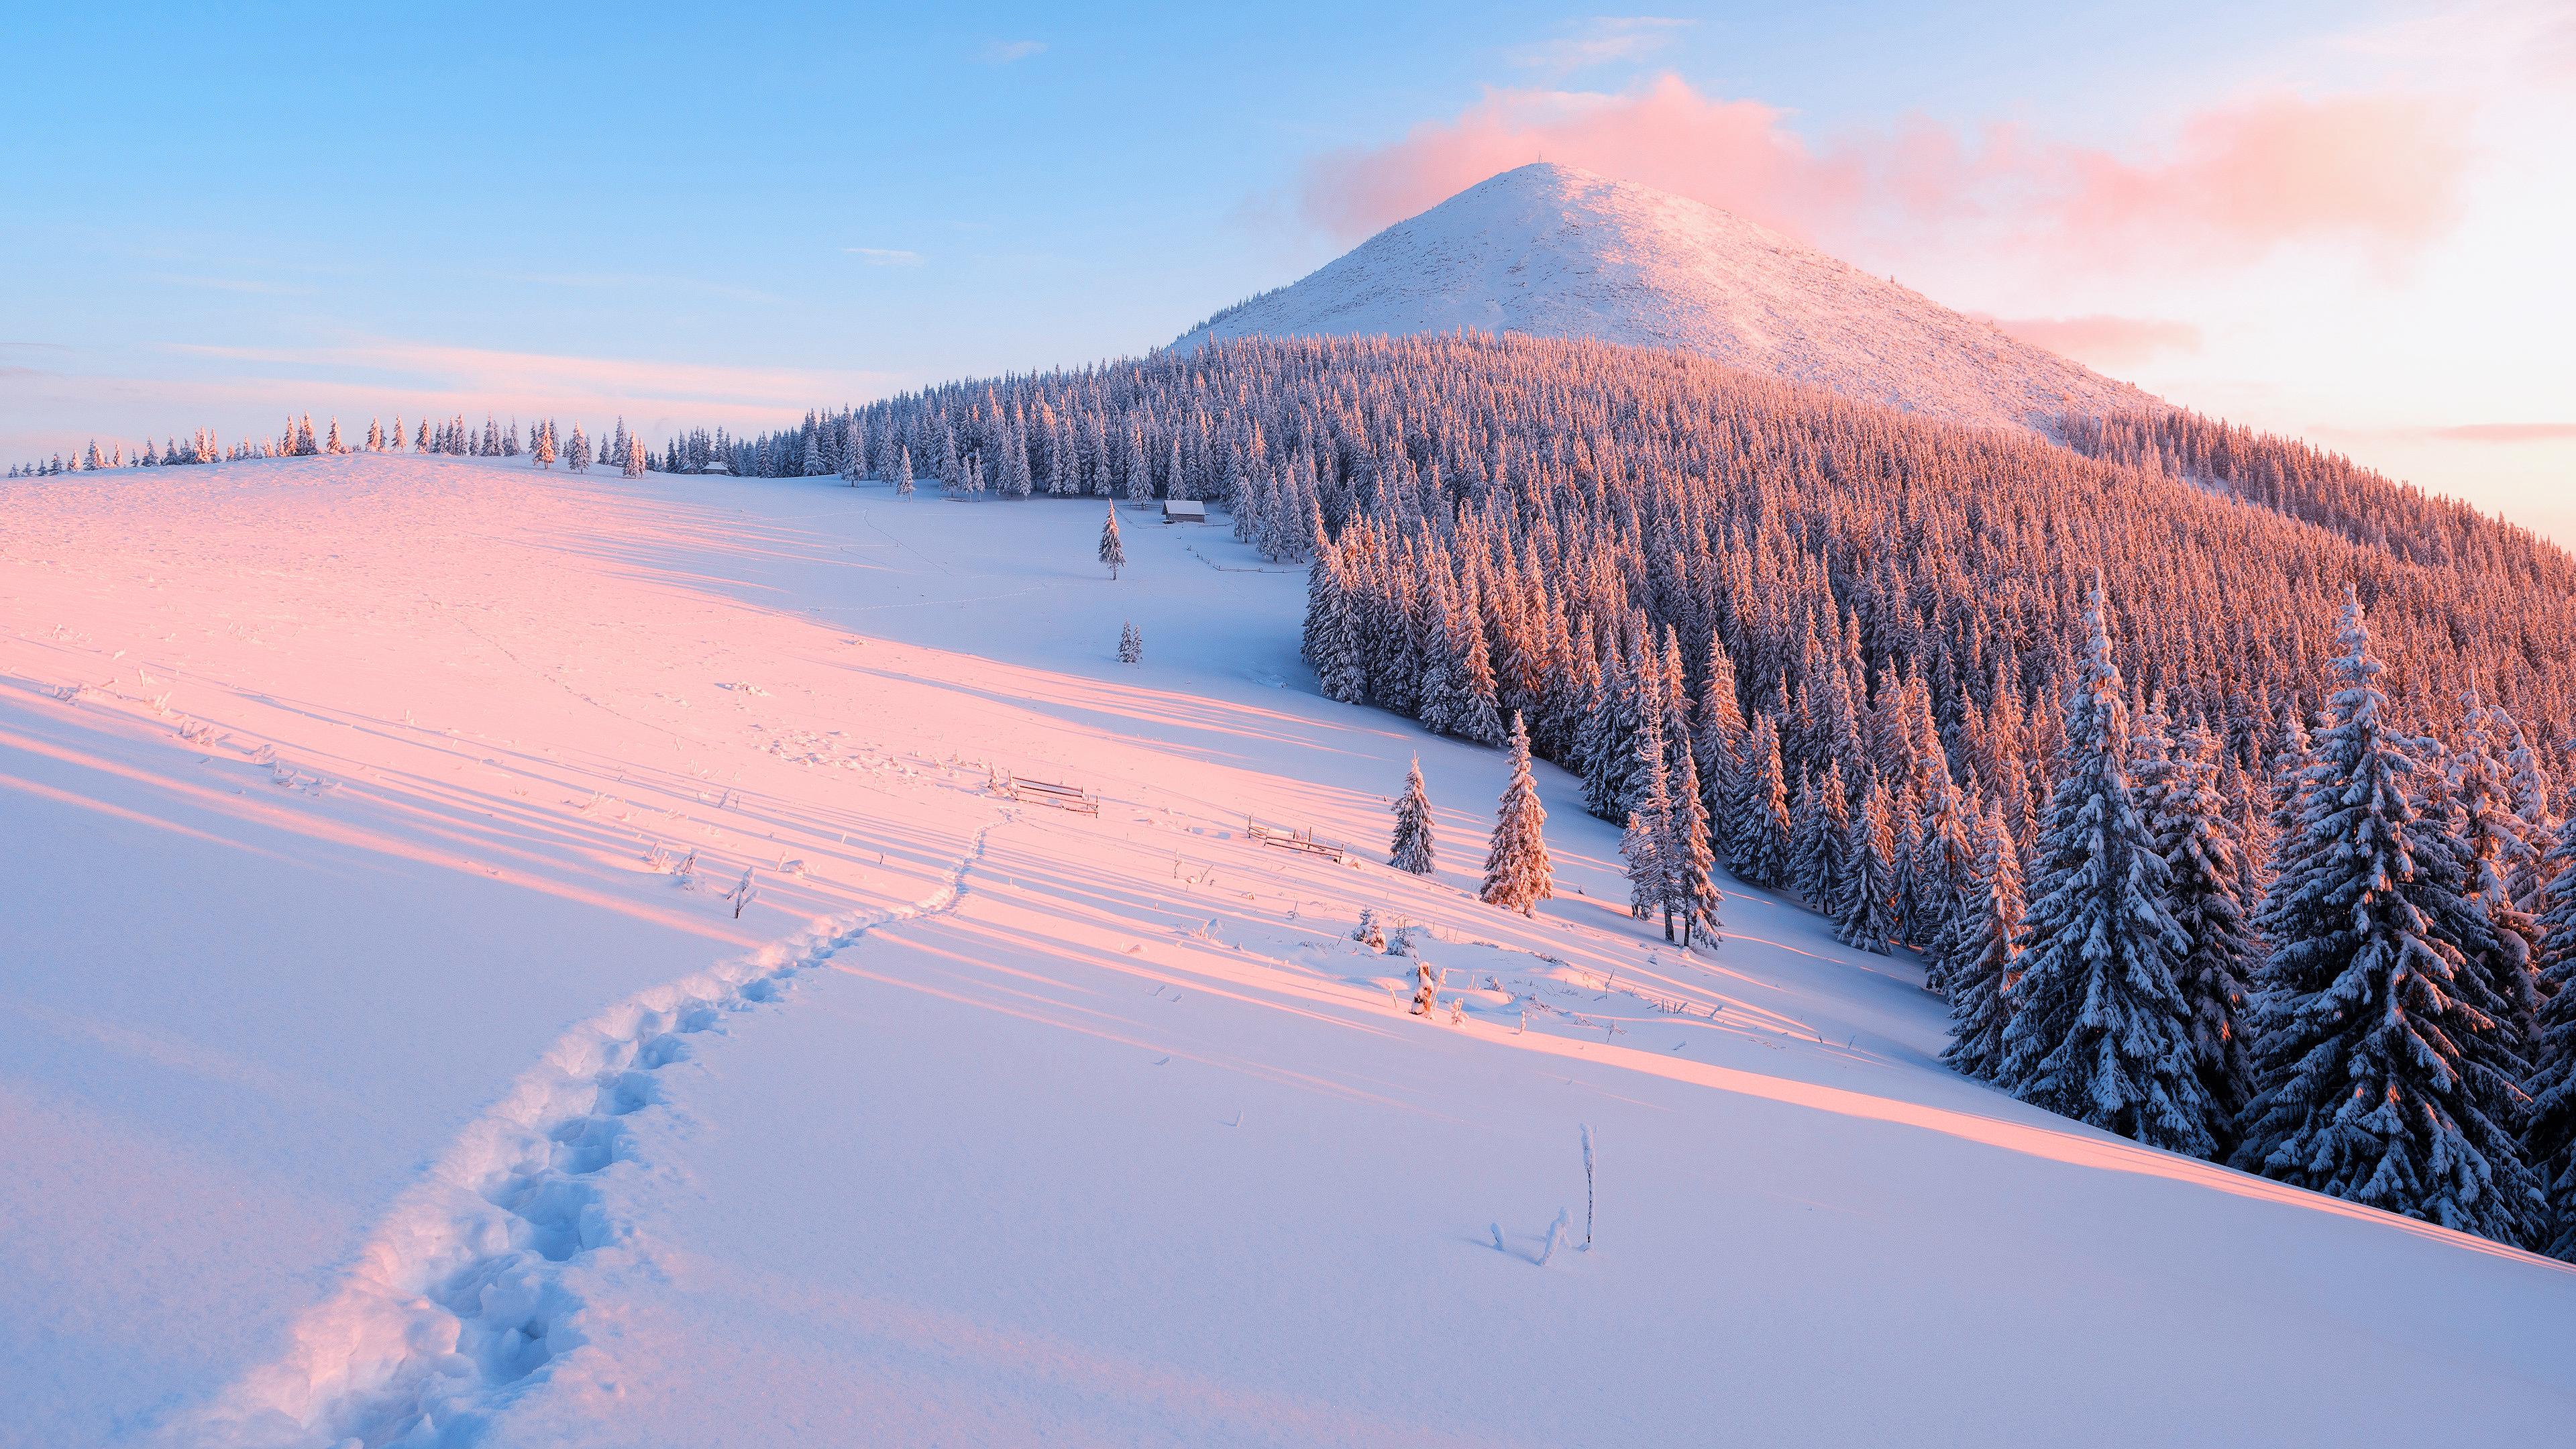 Snow 4K wallpaper for your desktop or mobile screen free and easy to download